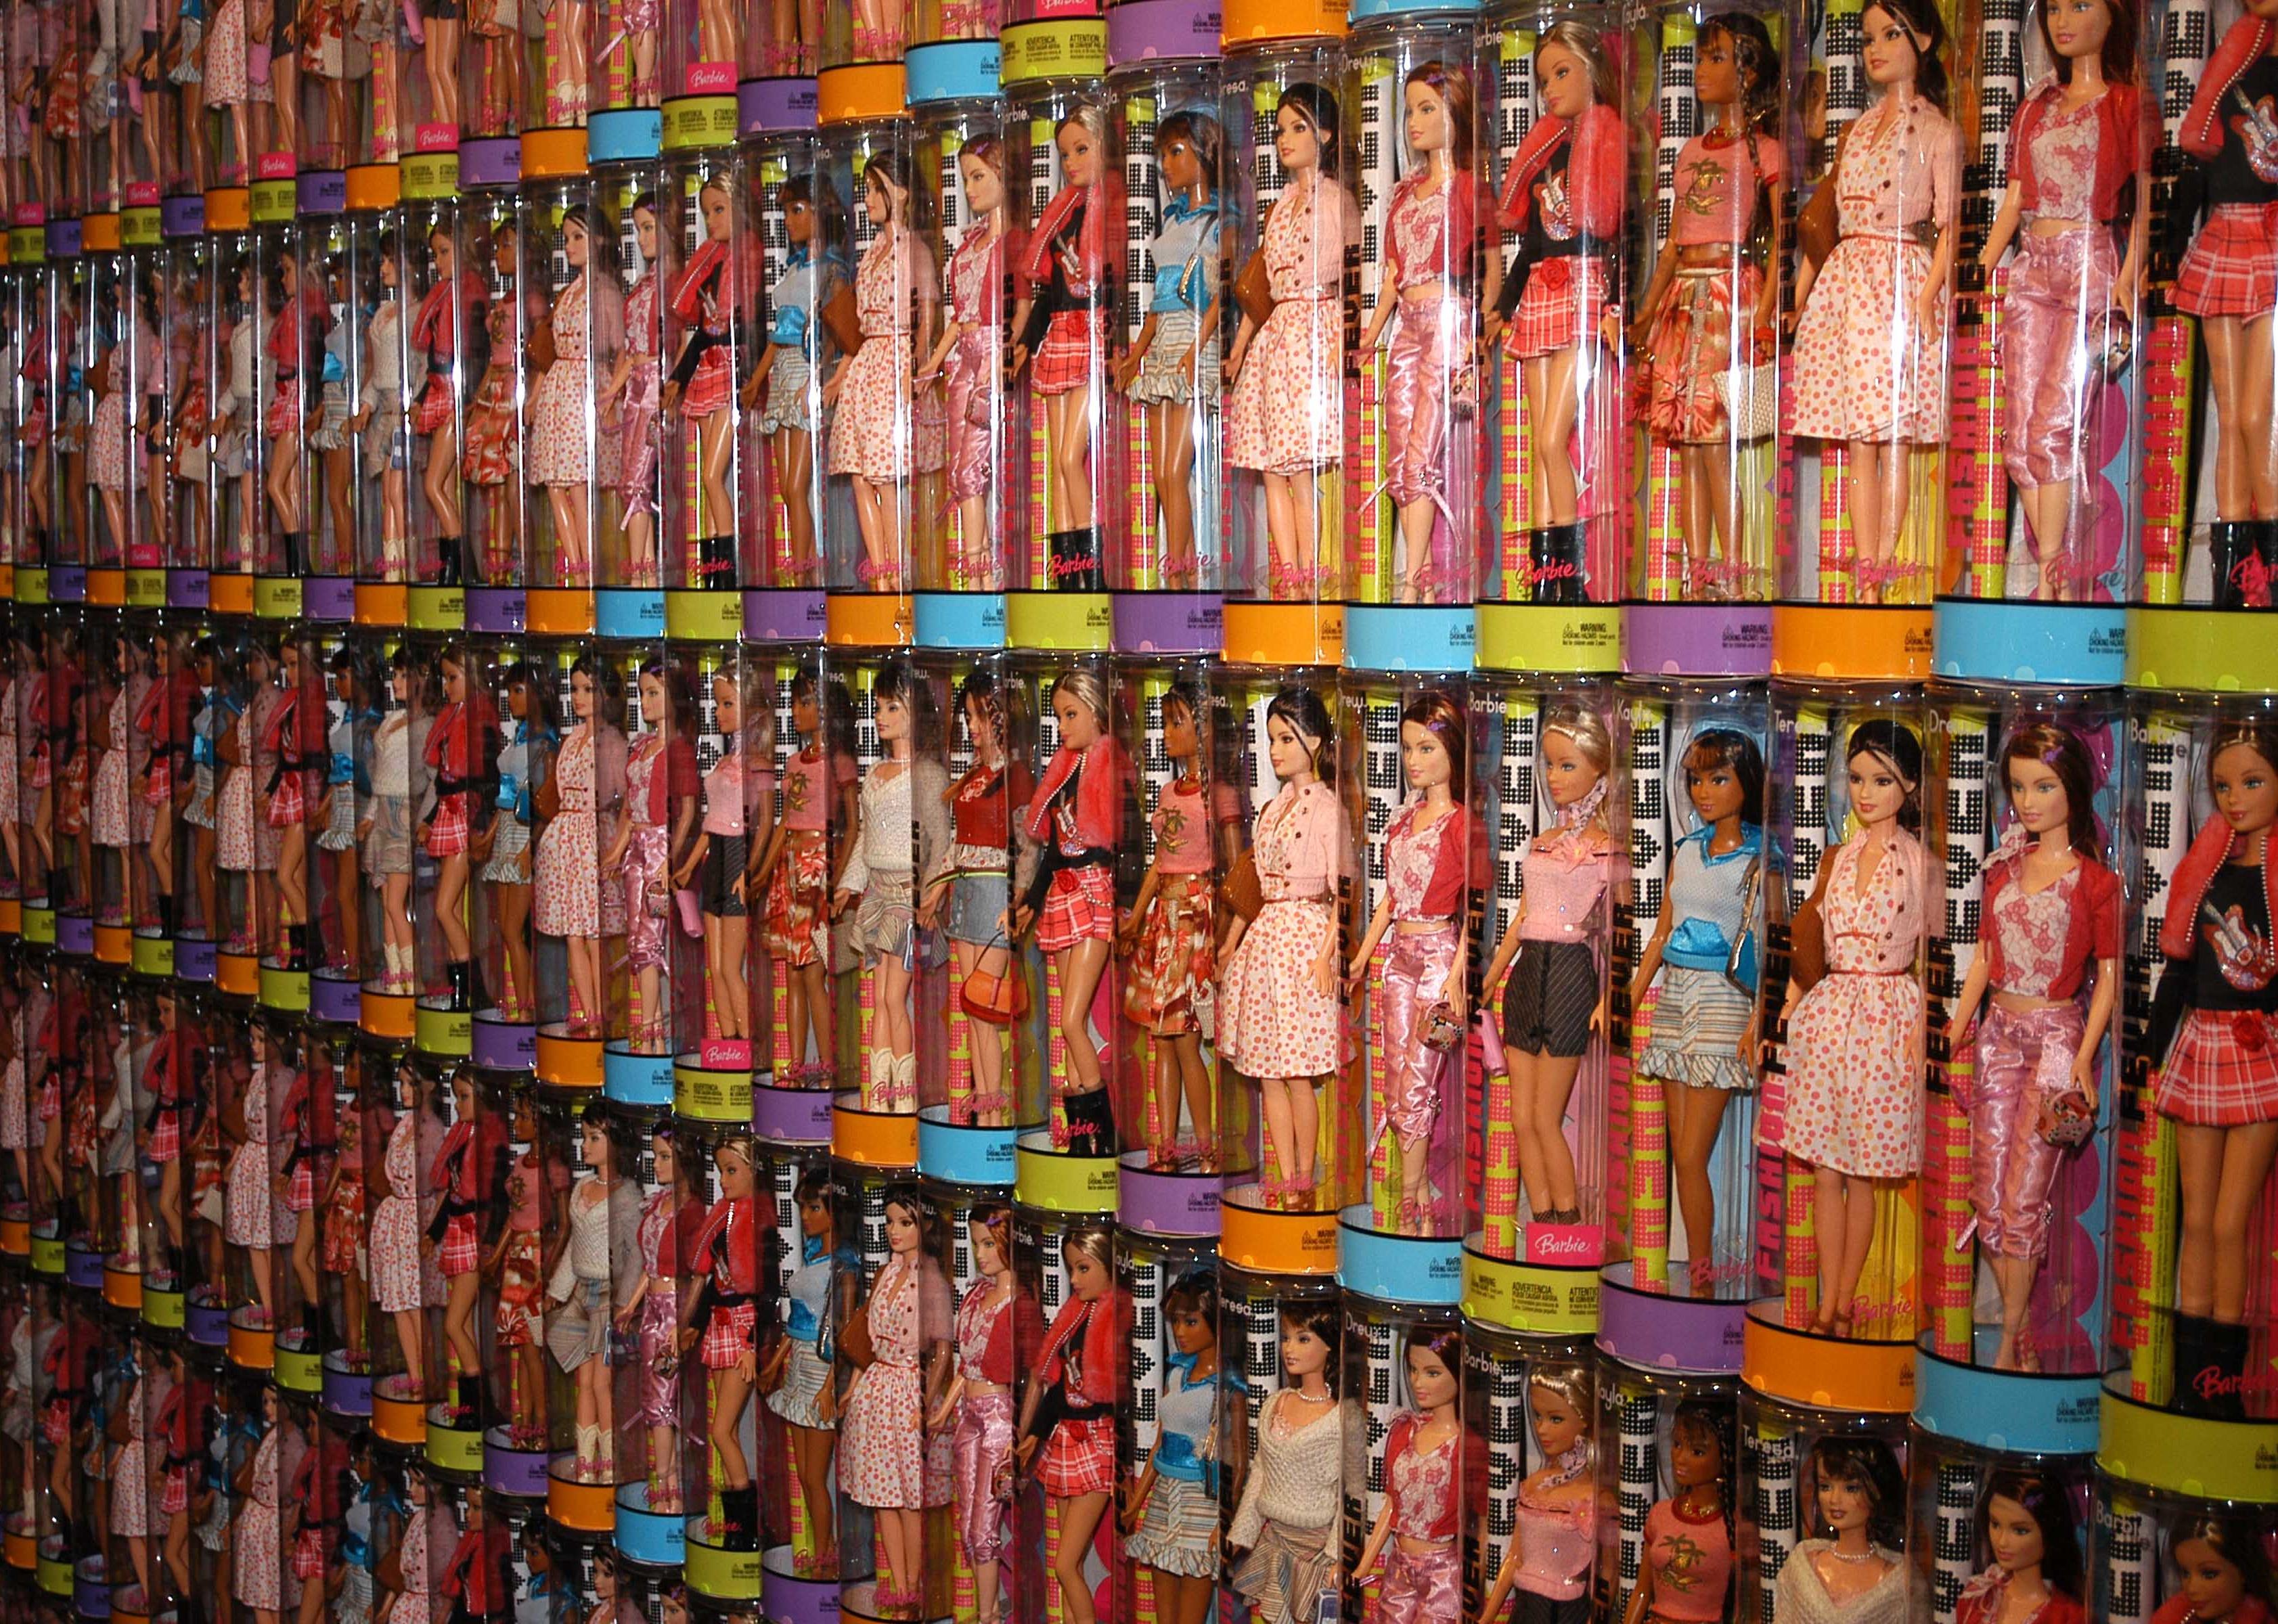 Rows of shelves lined with clear cylinders of Barbie dolls.